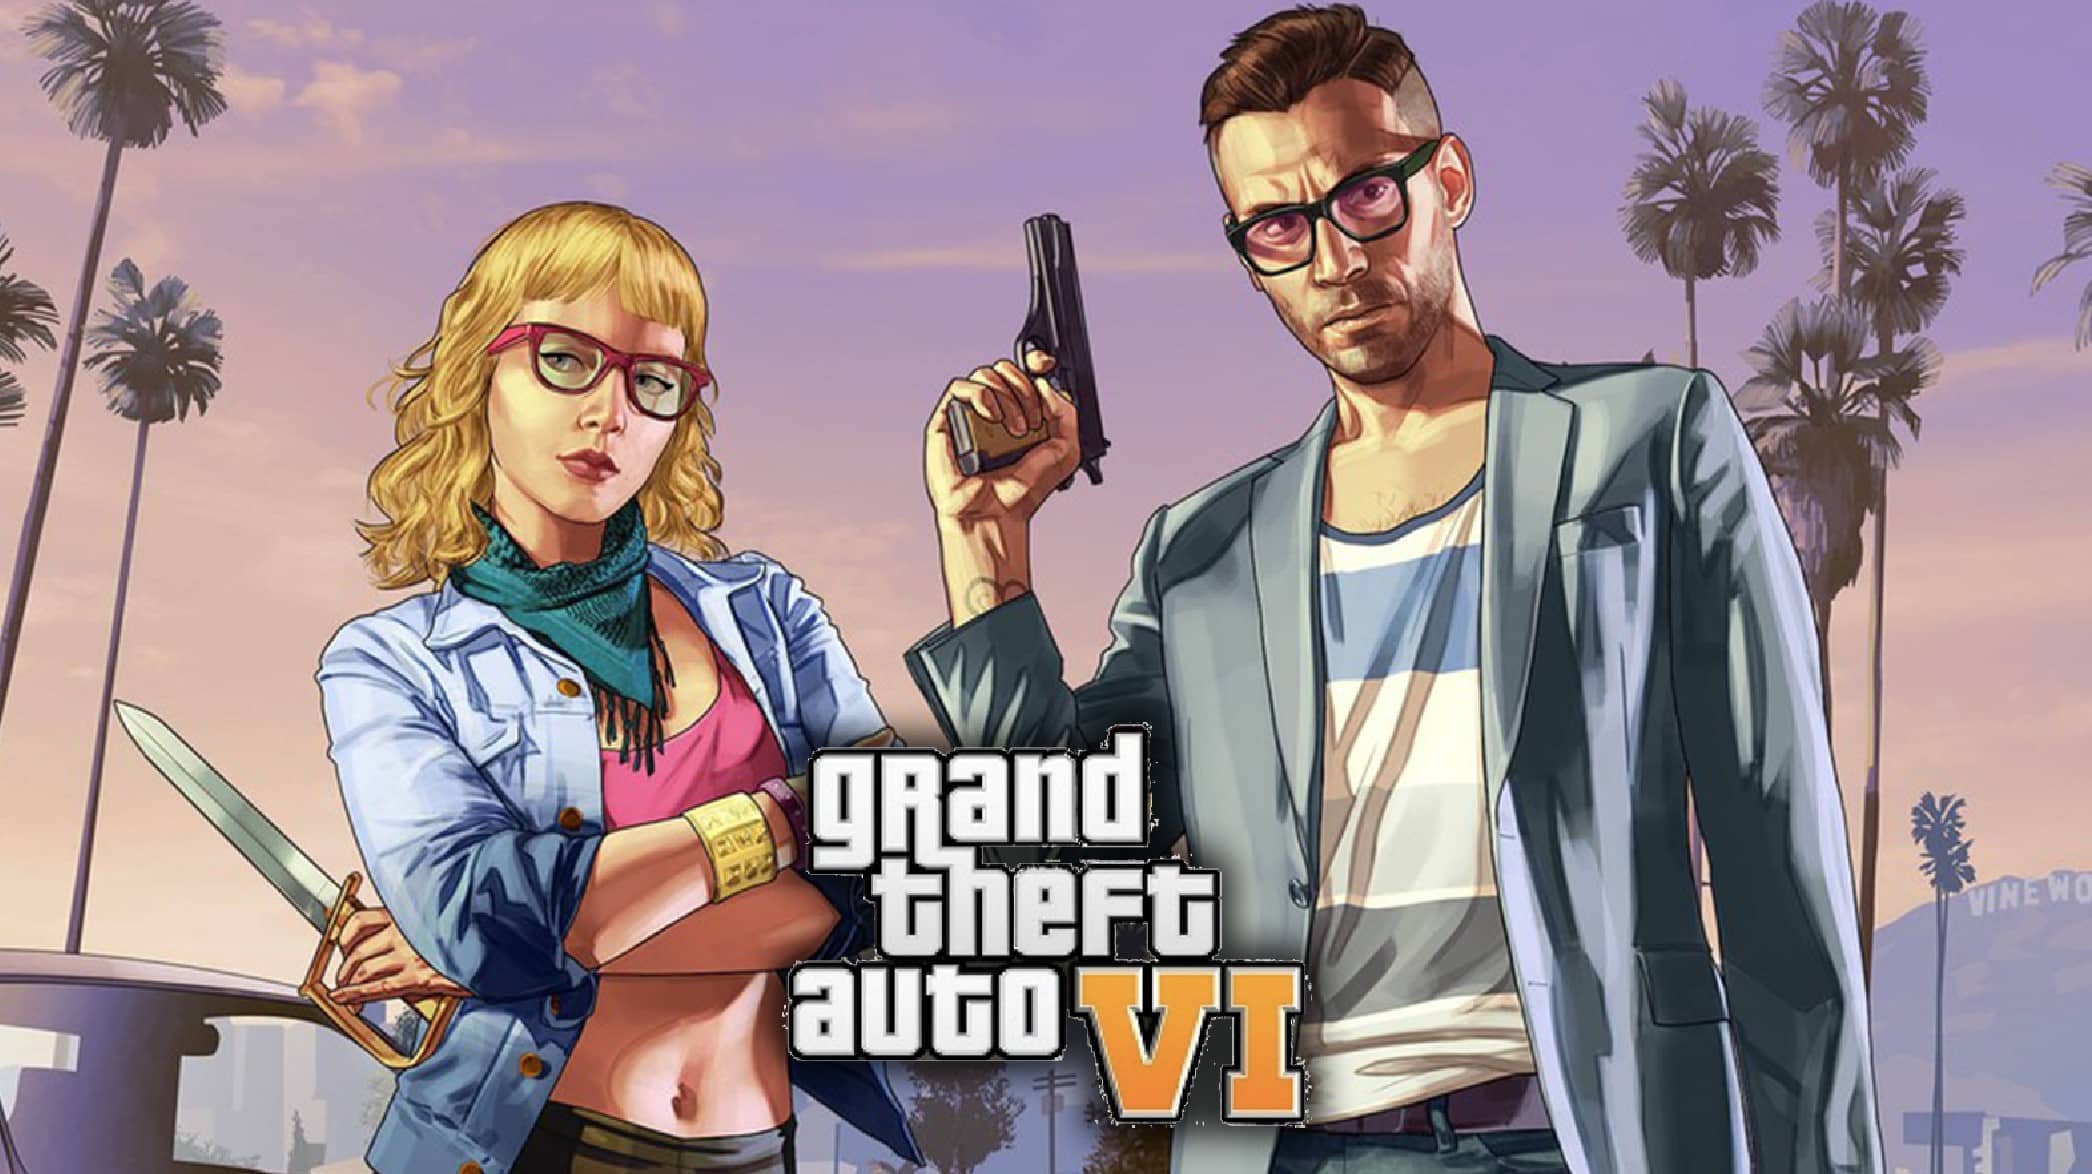 A Grand Theft Auto 6 Map Allegedly Showing Updated Vice City Leaks Online